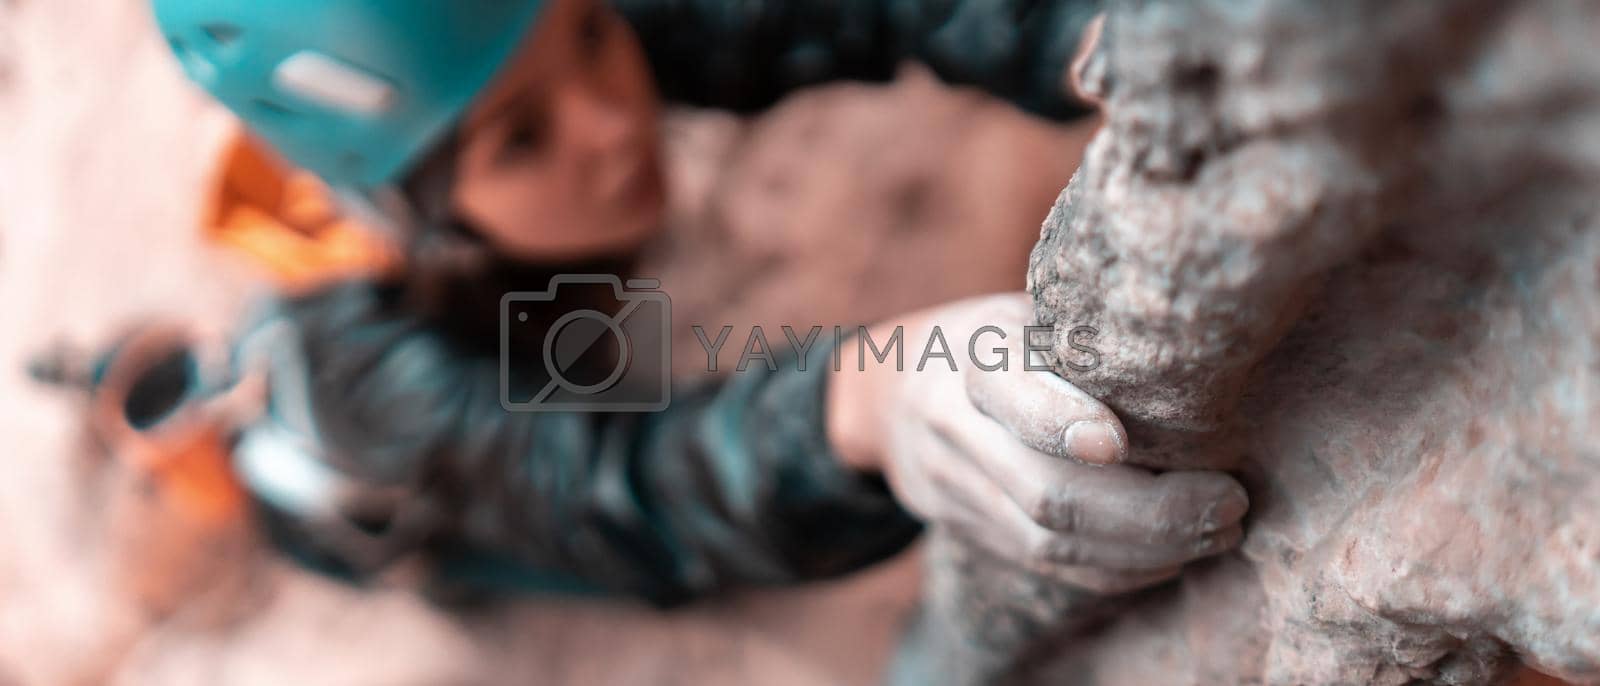 Royalty free image of Girl is climbing on the rocks, closeup view on hand. by africapink